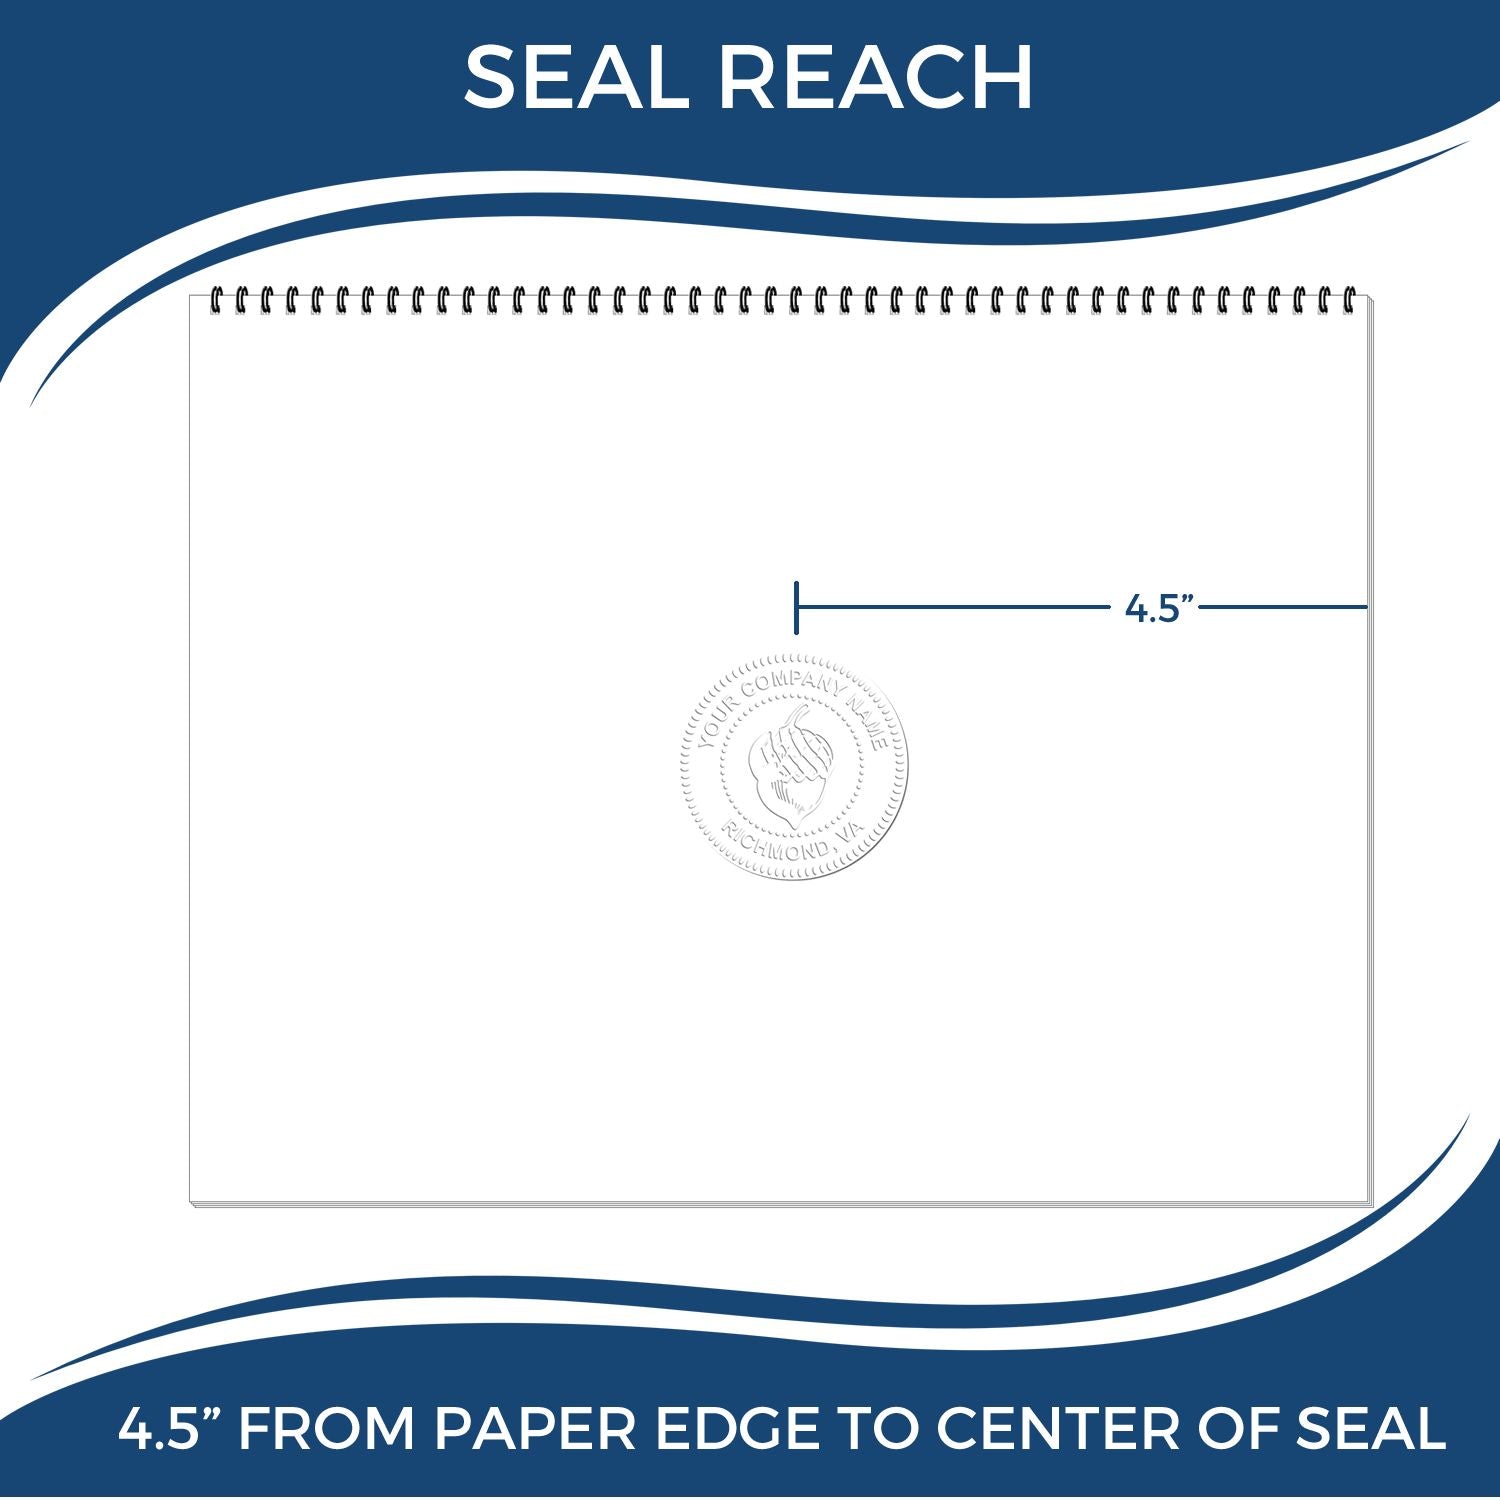 An infographic showing the seal reach which is represented by a ruler and a miniature seal image of the Extended Long Reach Louisiana Surveyor Embosser